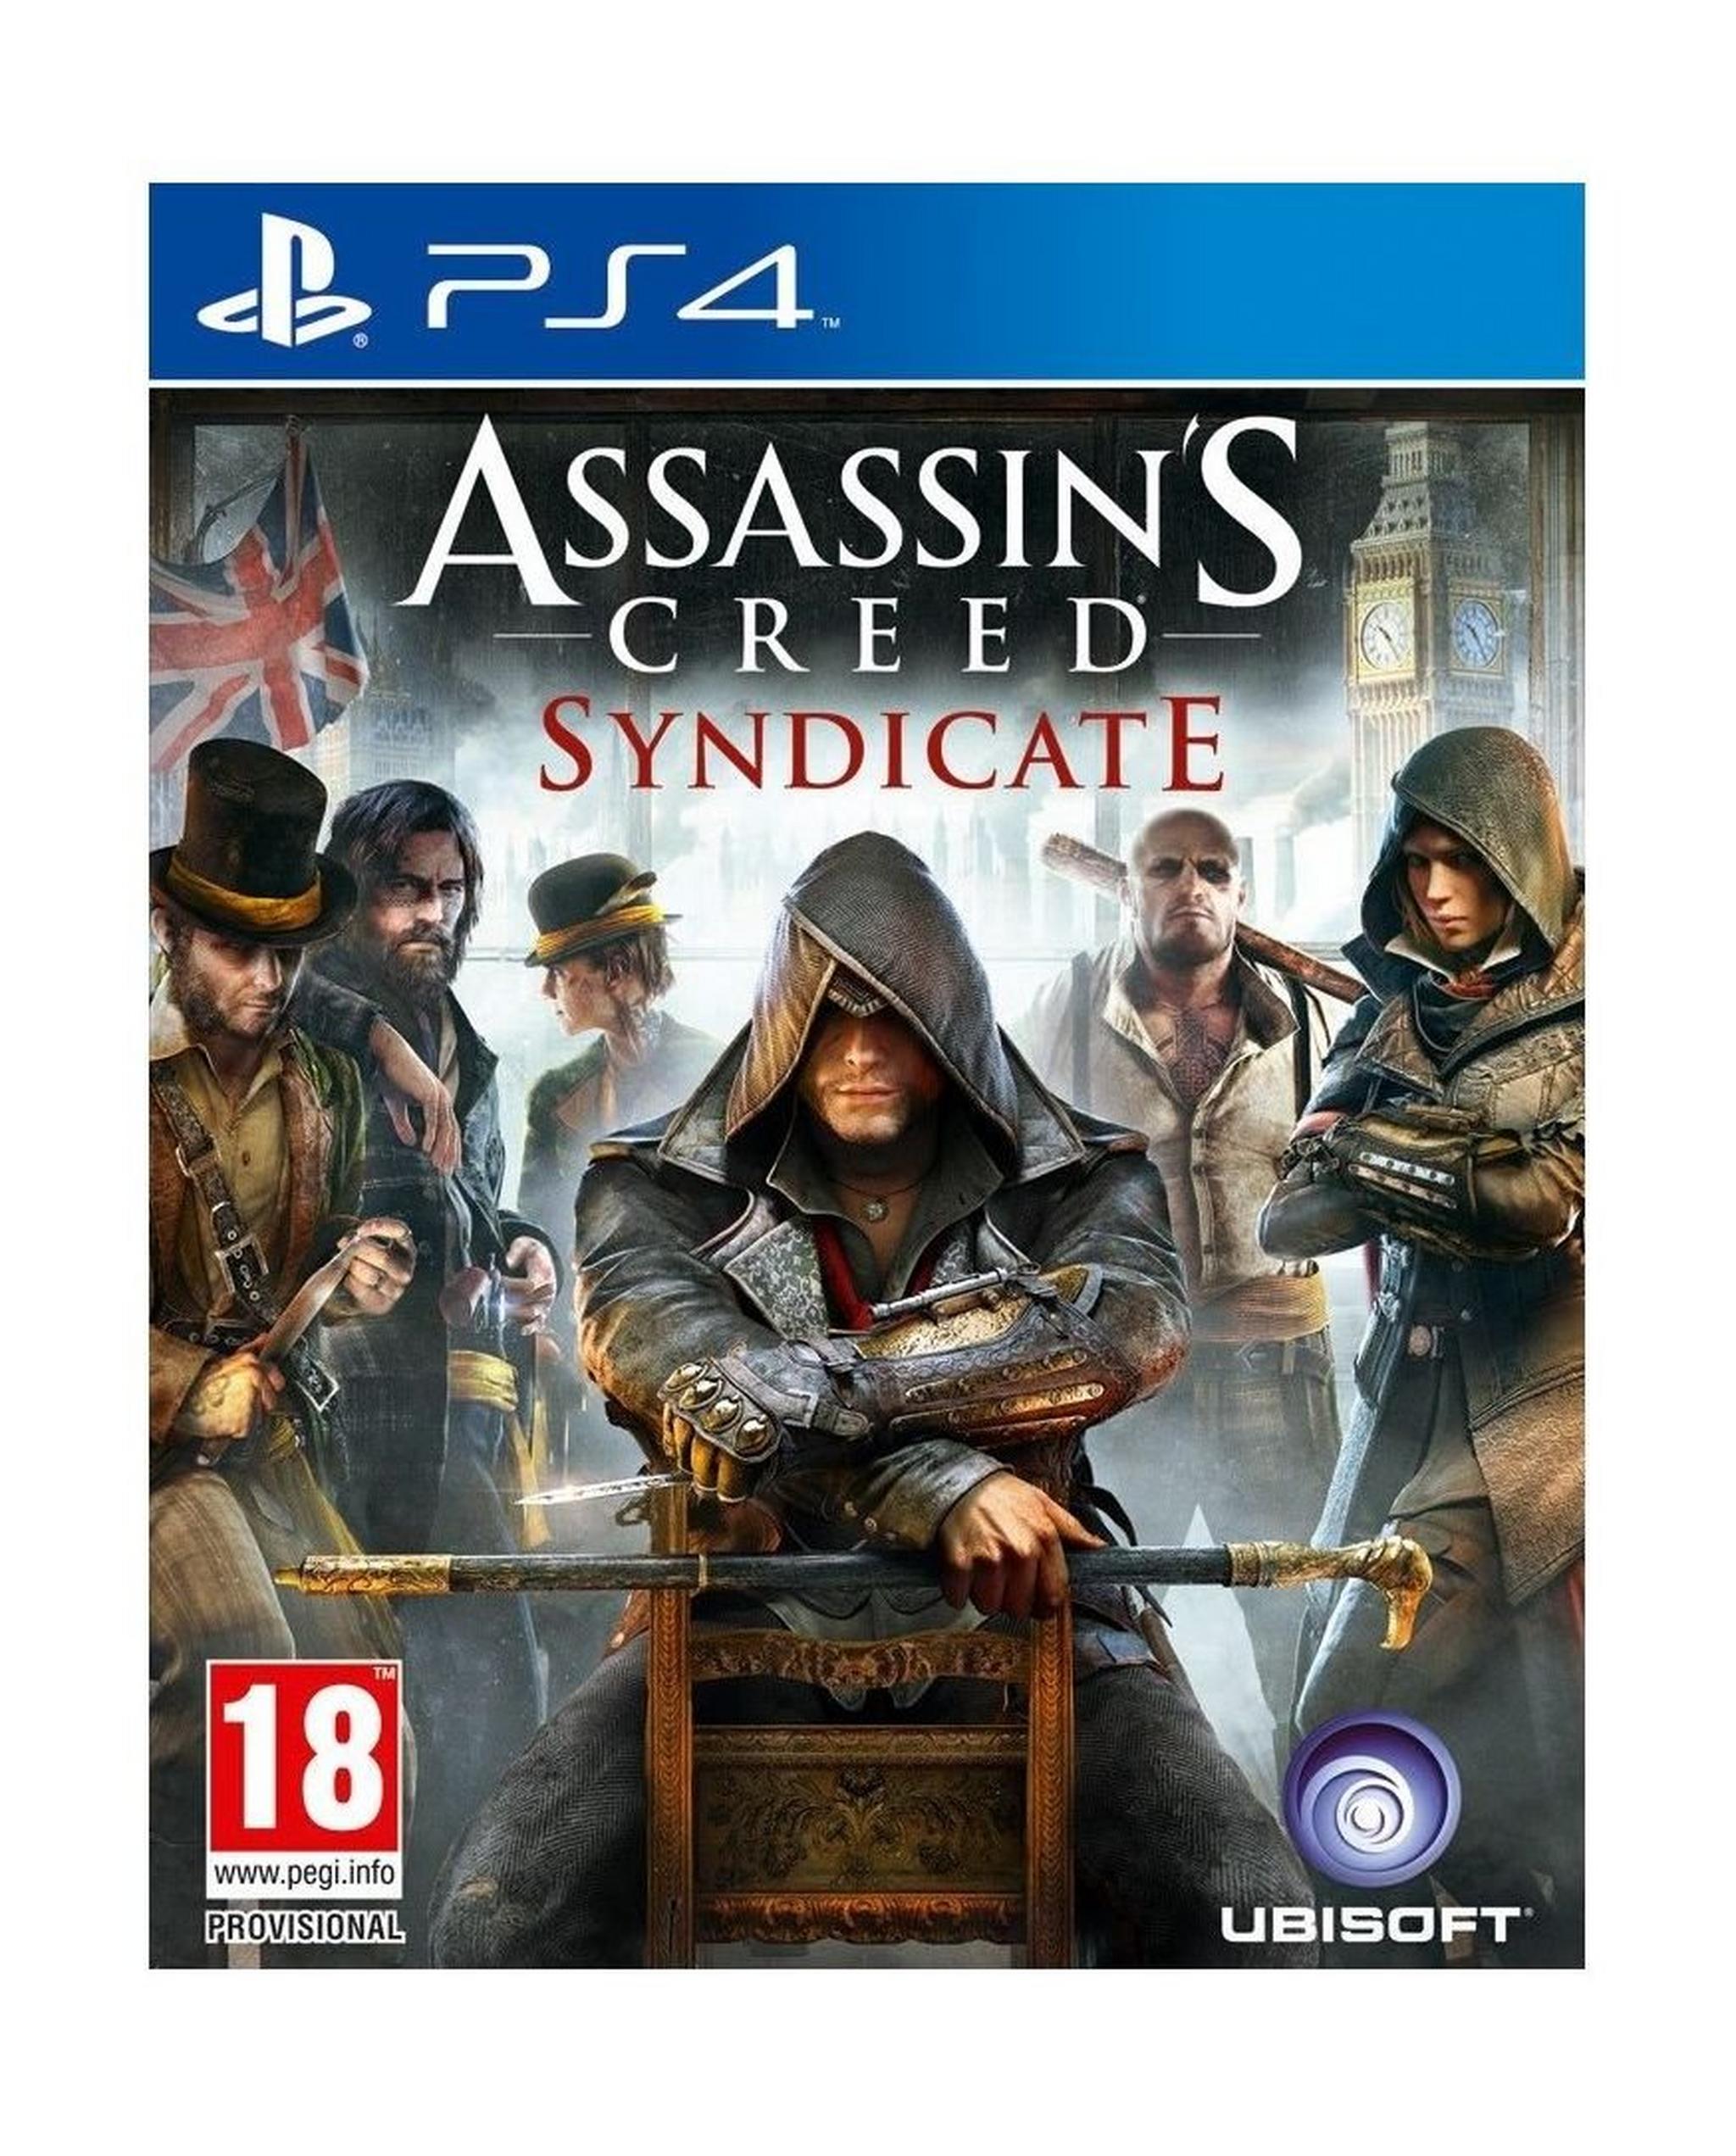 Assassin's Creed Syndicate - PlayStation 4 Game